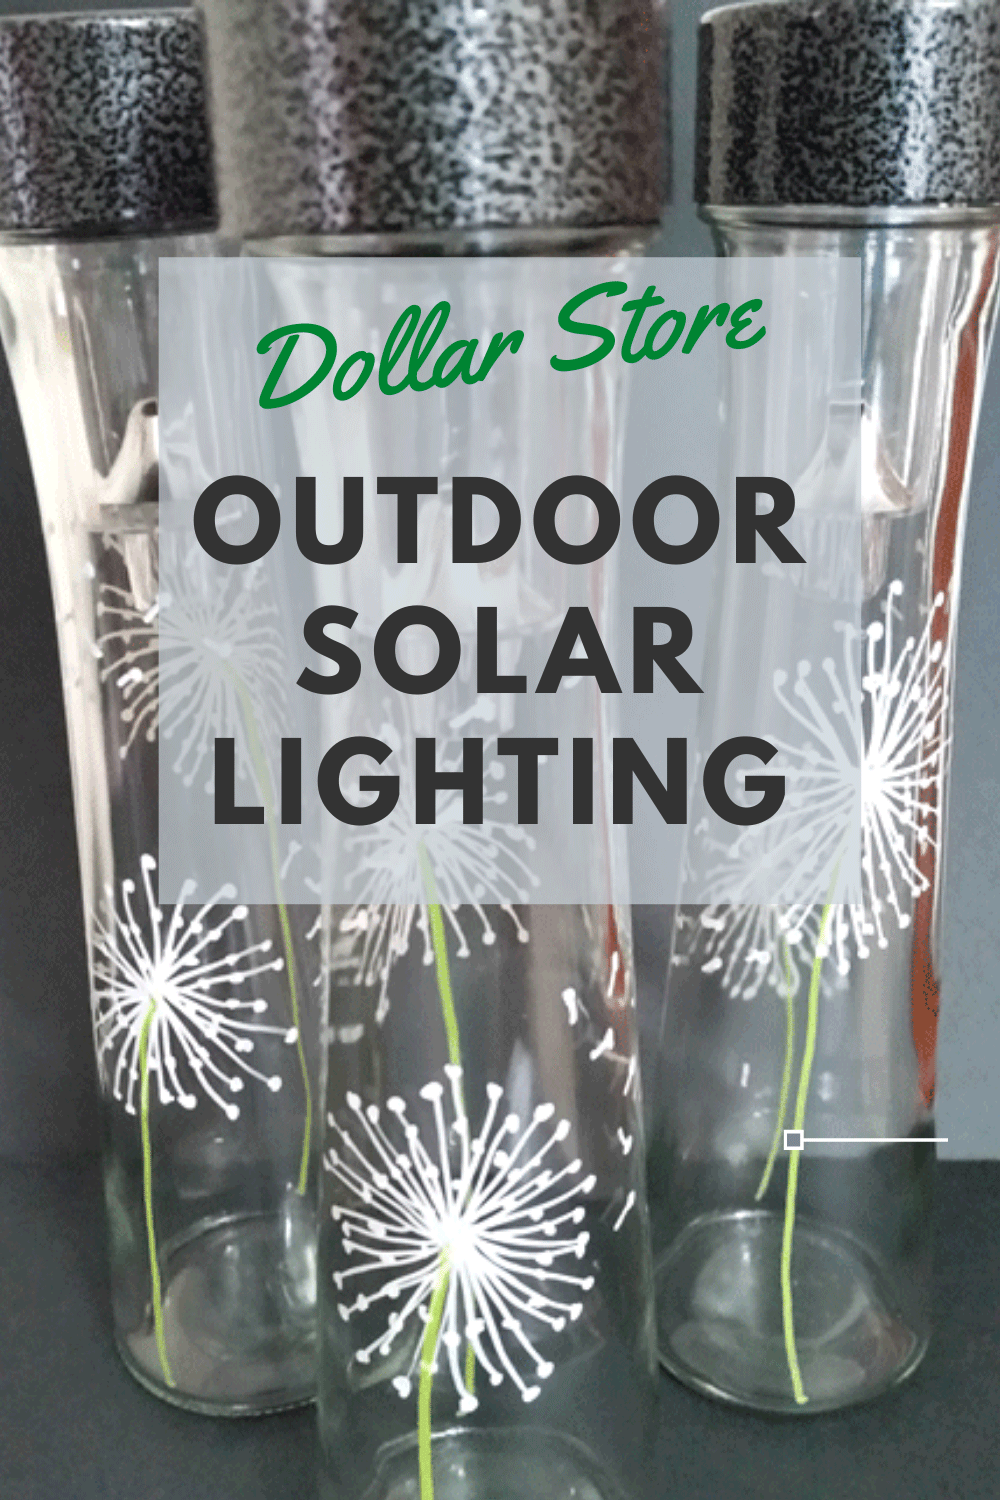 Dollar Store Vases Turned Into Awesome Outdoor Lighting - Dollar Store Vases Turned Into Awesome Outdoor Lighting -   17 diy Dollar Tree solar lights ideas